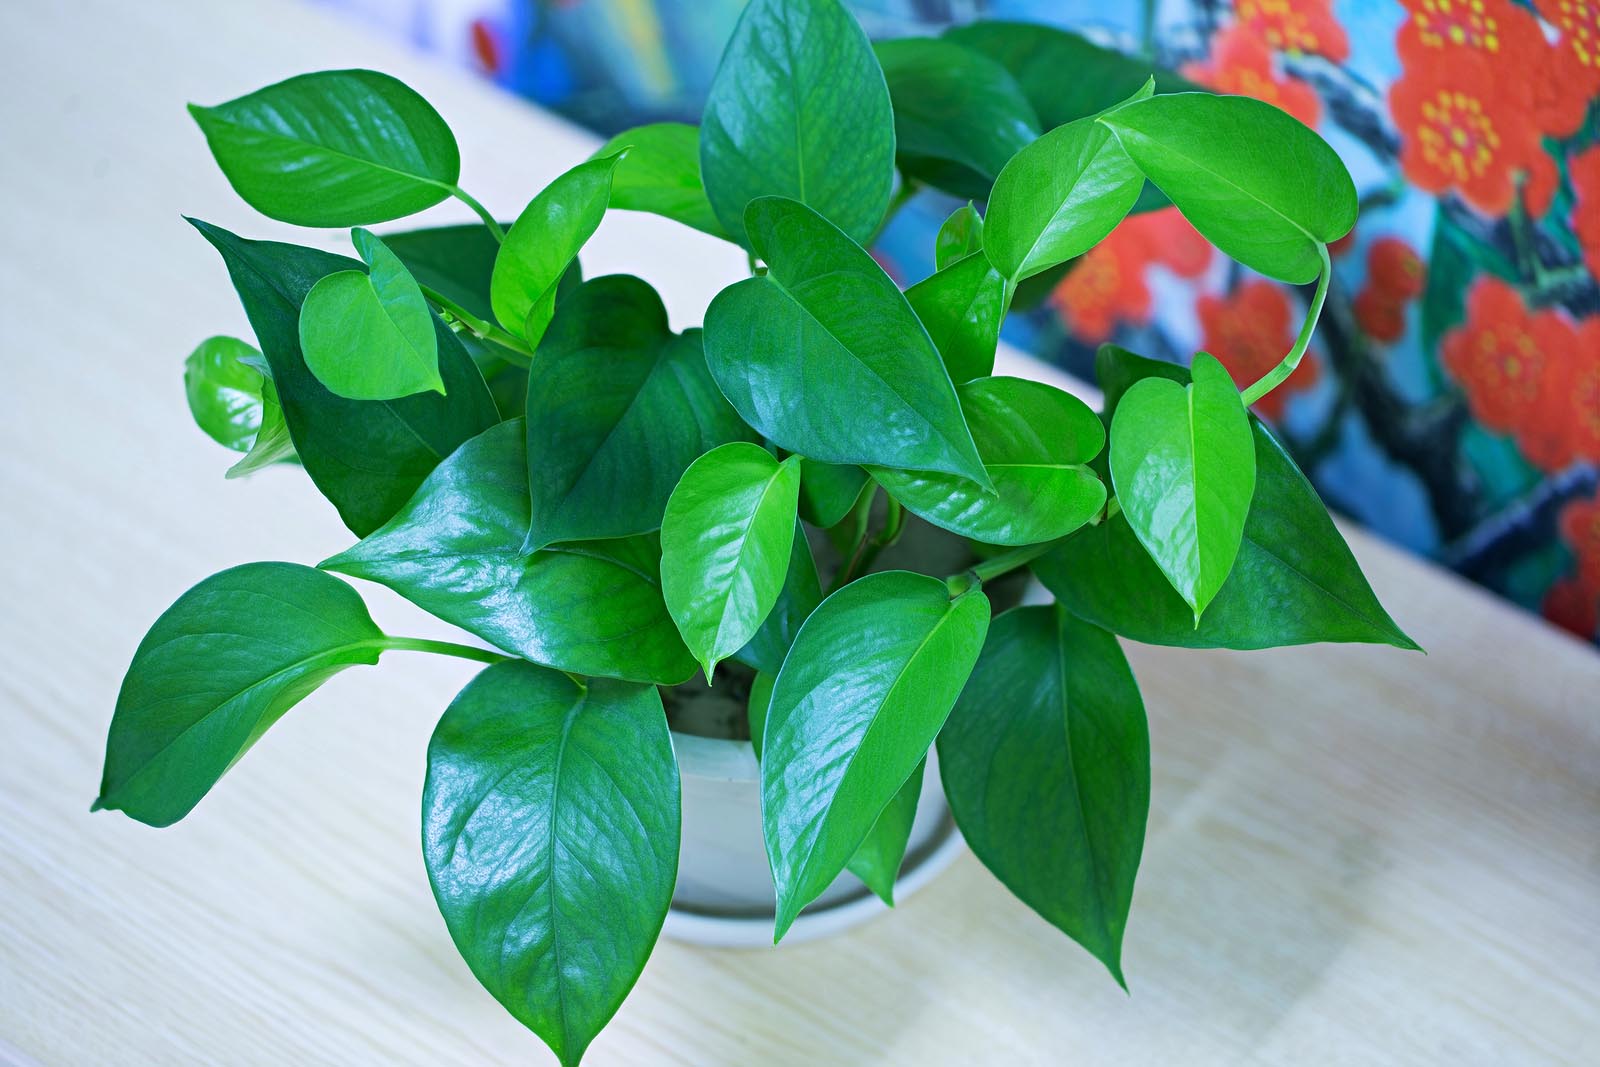 Golden pothos is one of many houseplants that can improve your health